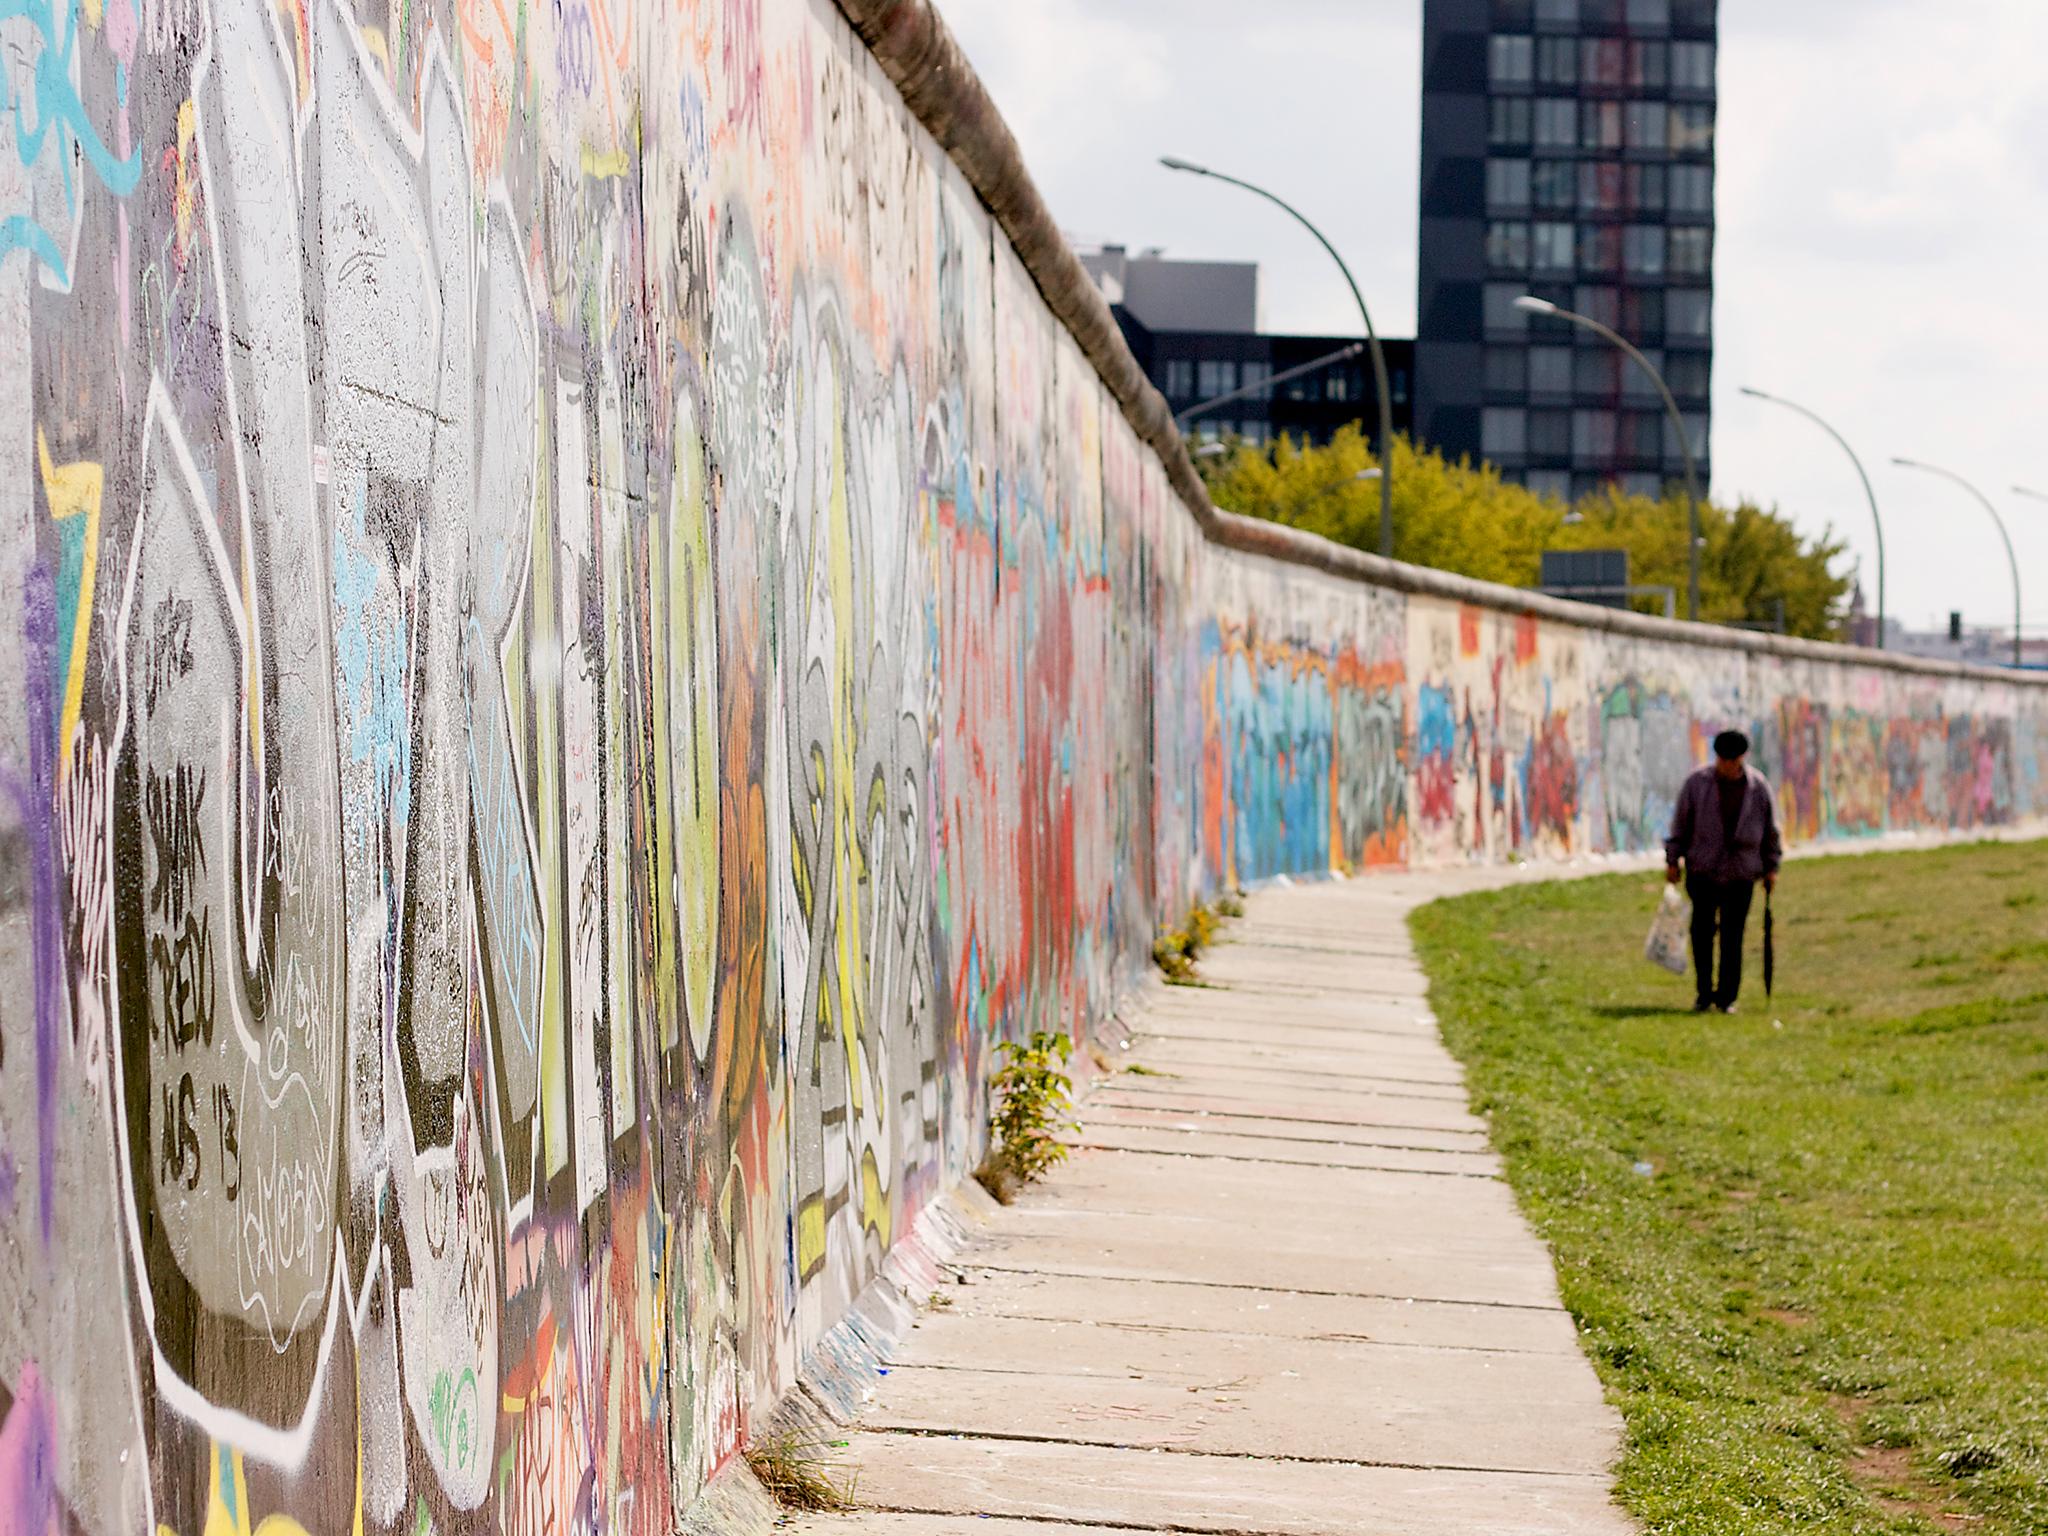 Some of the Berlin Wall still stands as a reminder to future generations (Fabiano Rebeque/Flickr)